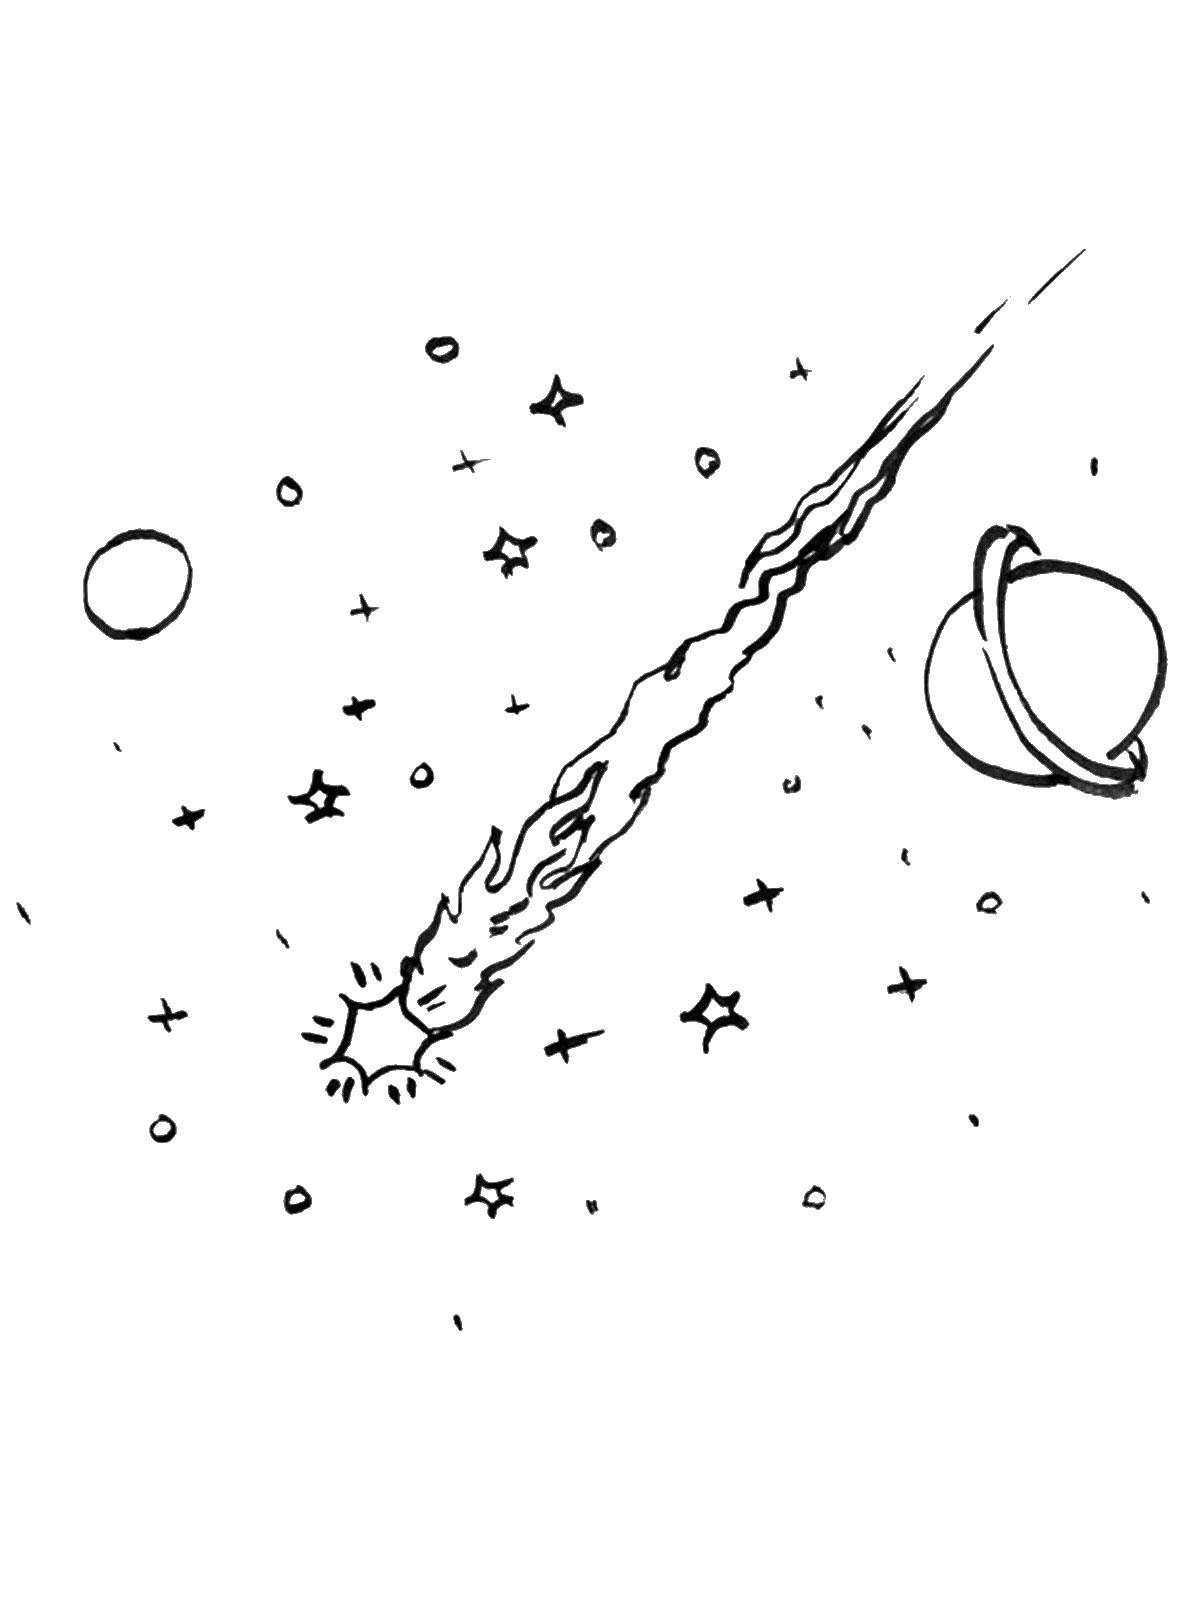 Coloring Comets among the planets. Category The day of cosmonautics. Tags:  space, stars, planets, comet.